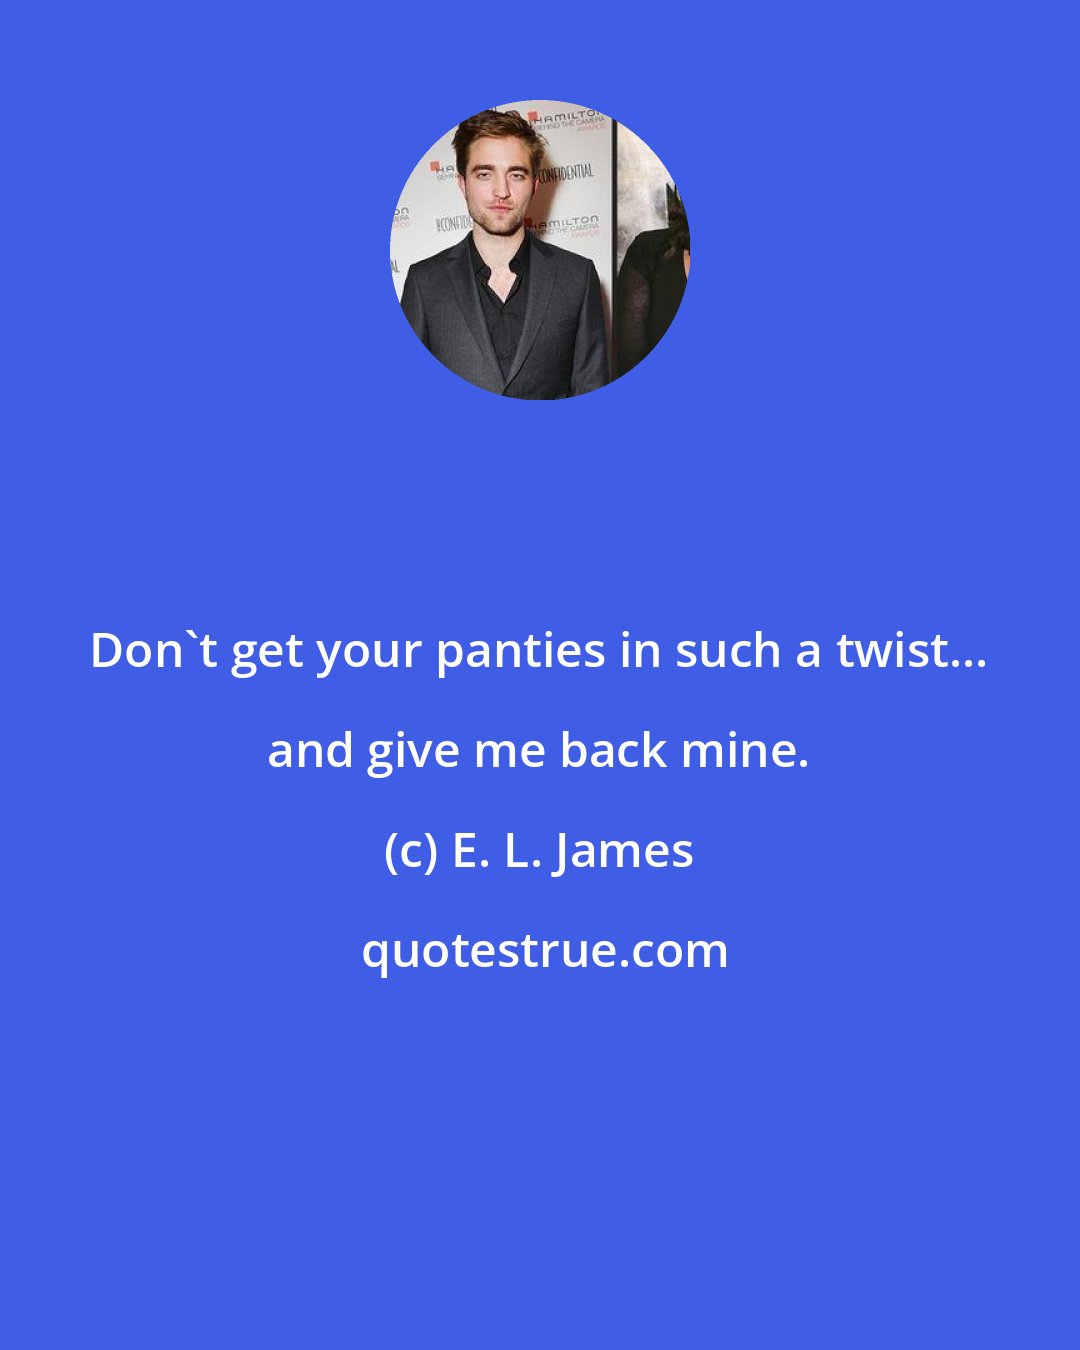 E. L. James: Don't get your panties in such a twist... and give me back mine.